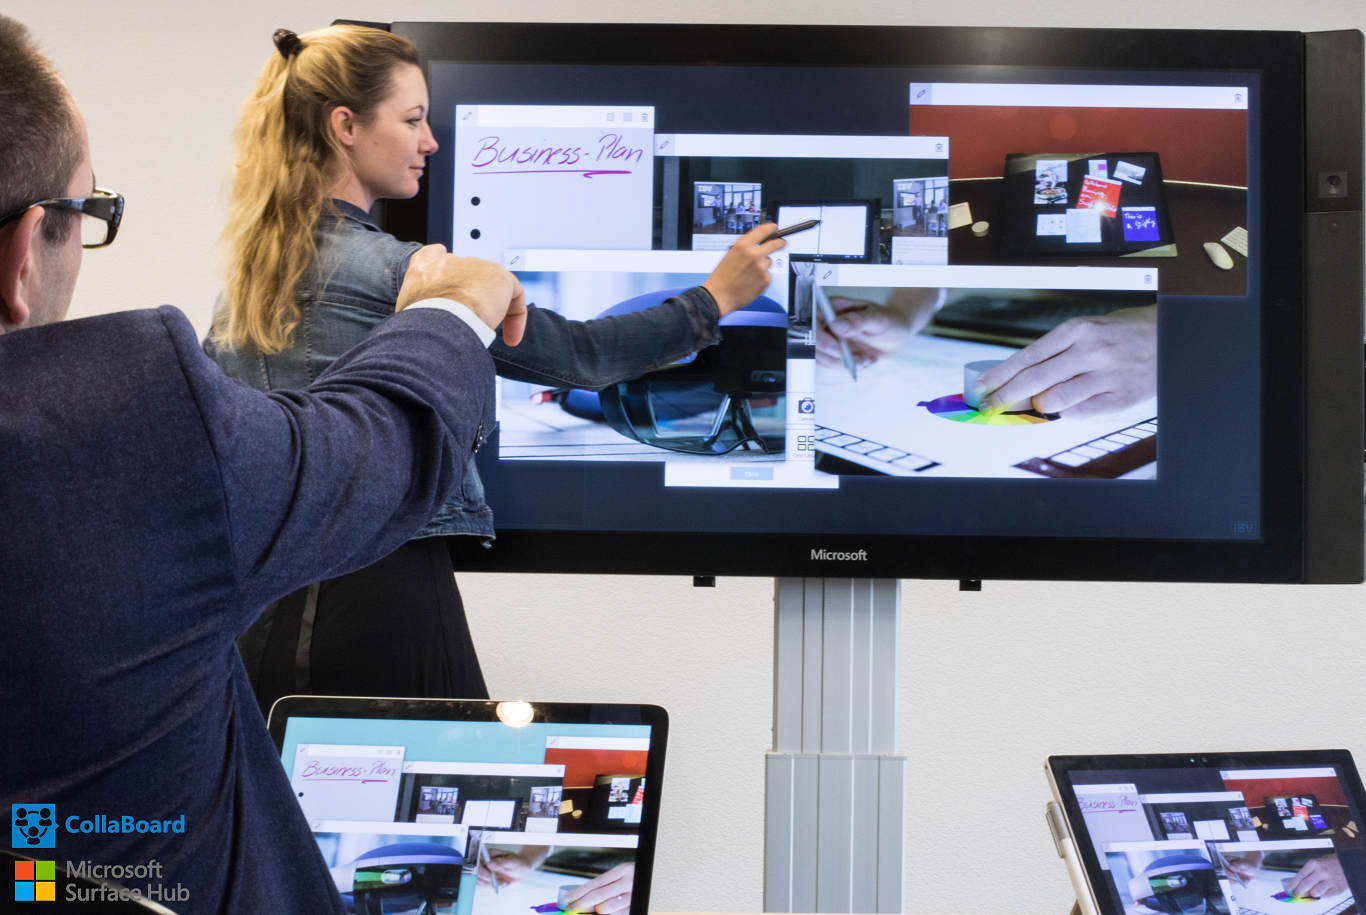 CollaBoard, your Surface Hub app